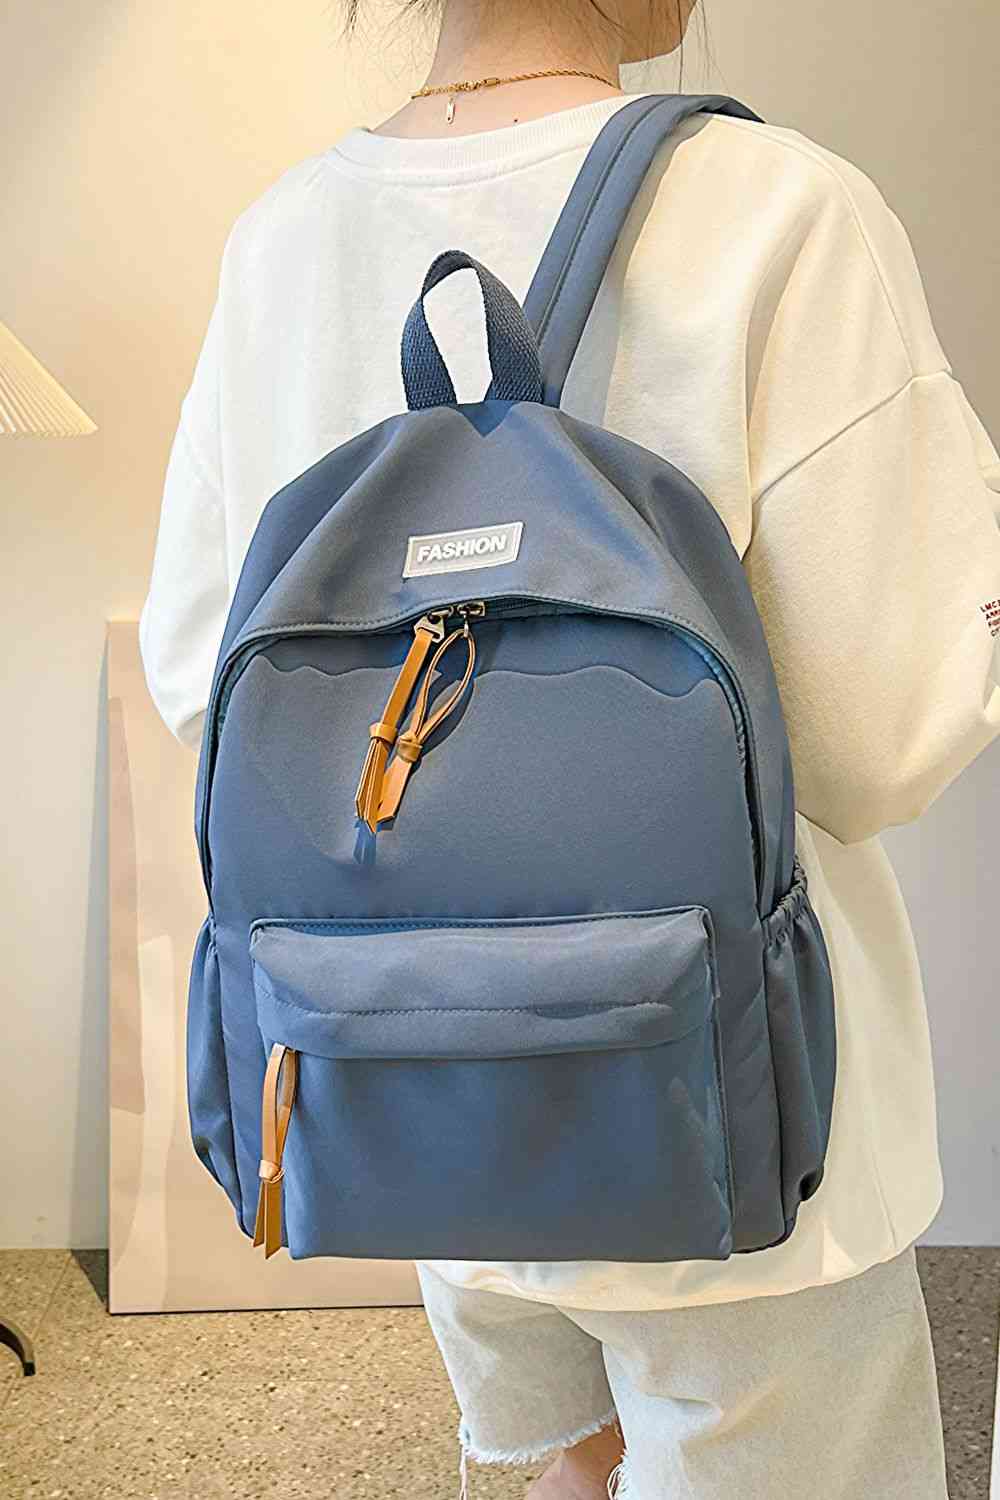 Adored FASHION Polyester Backpack